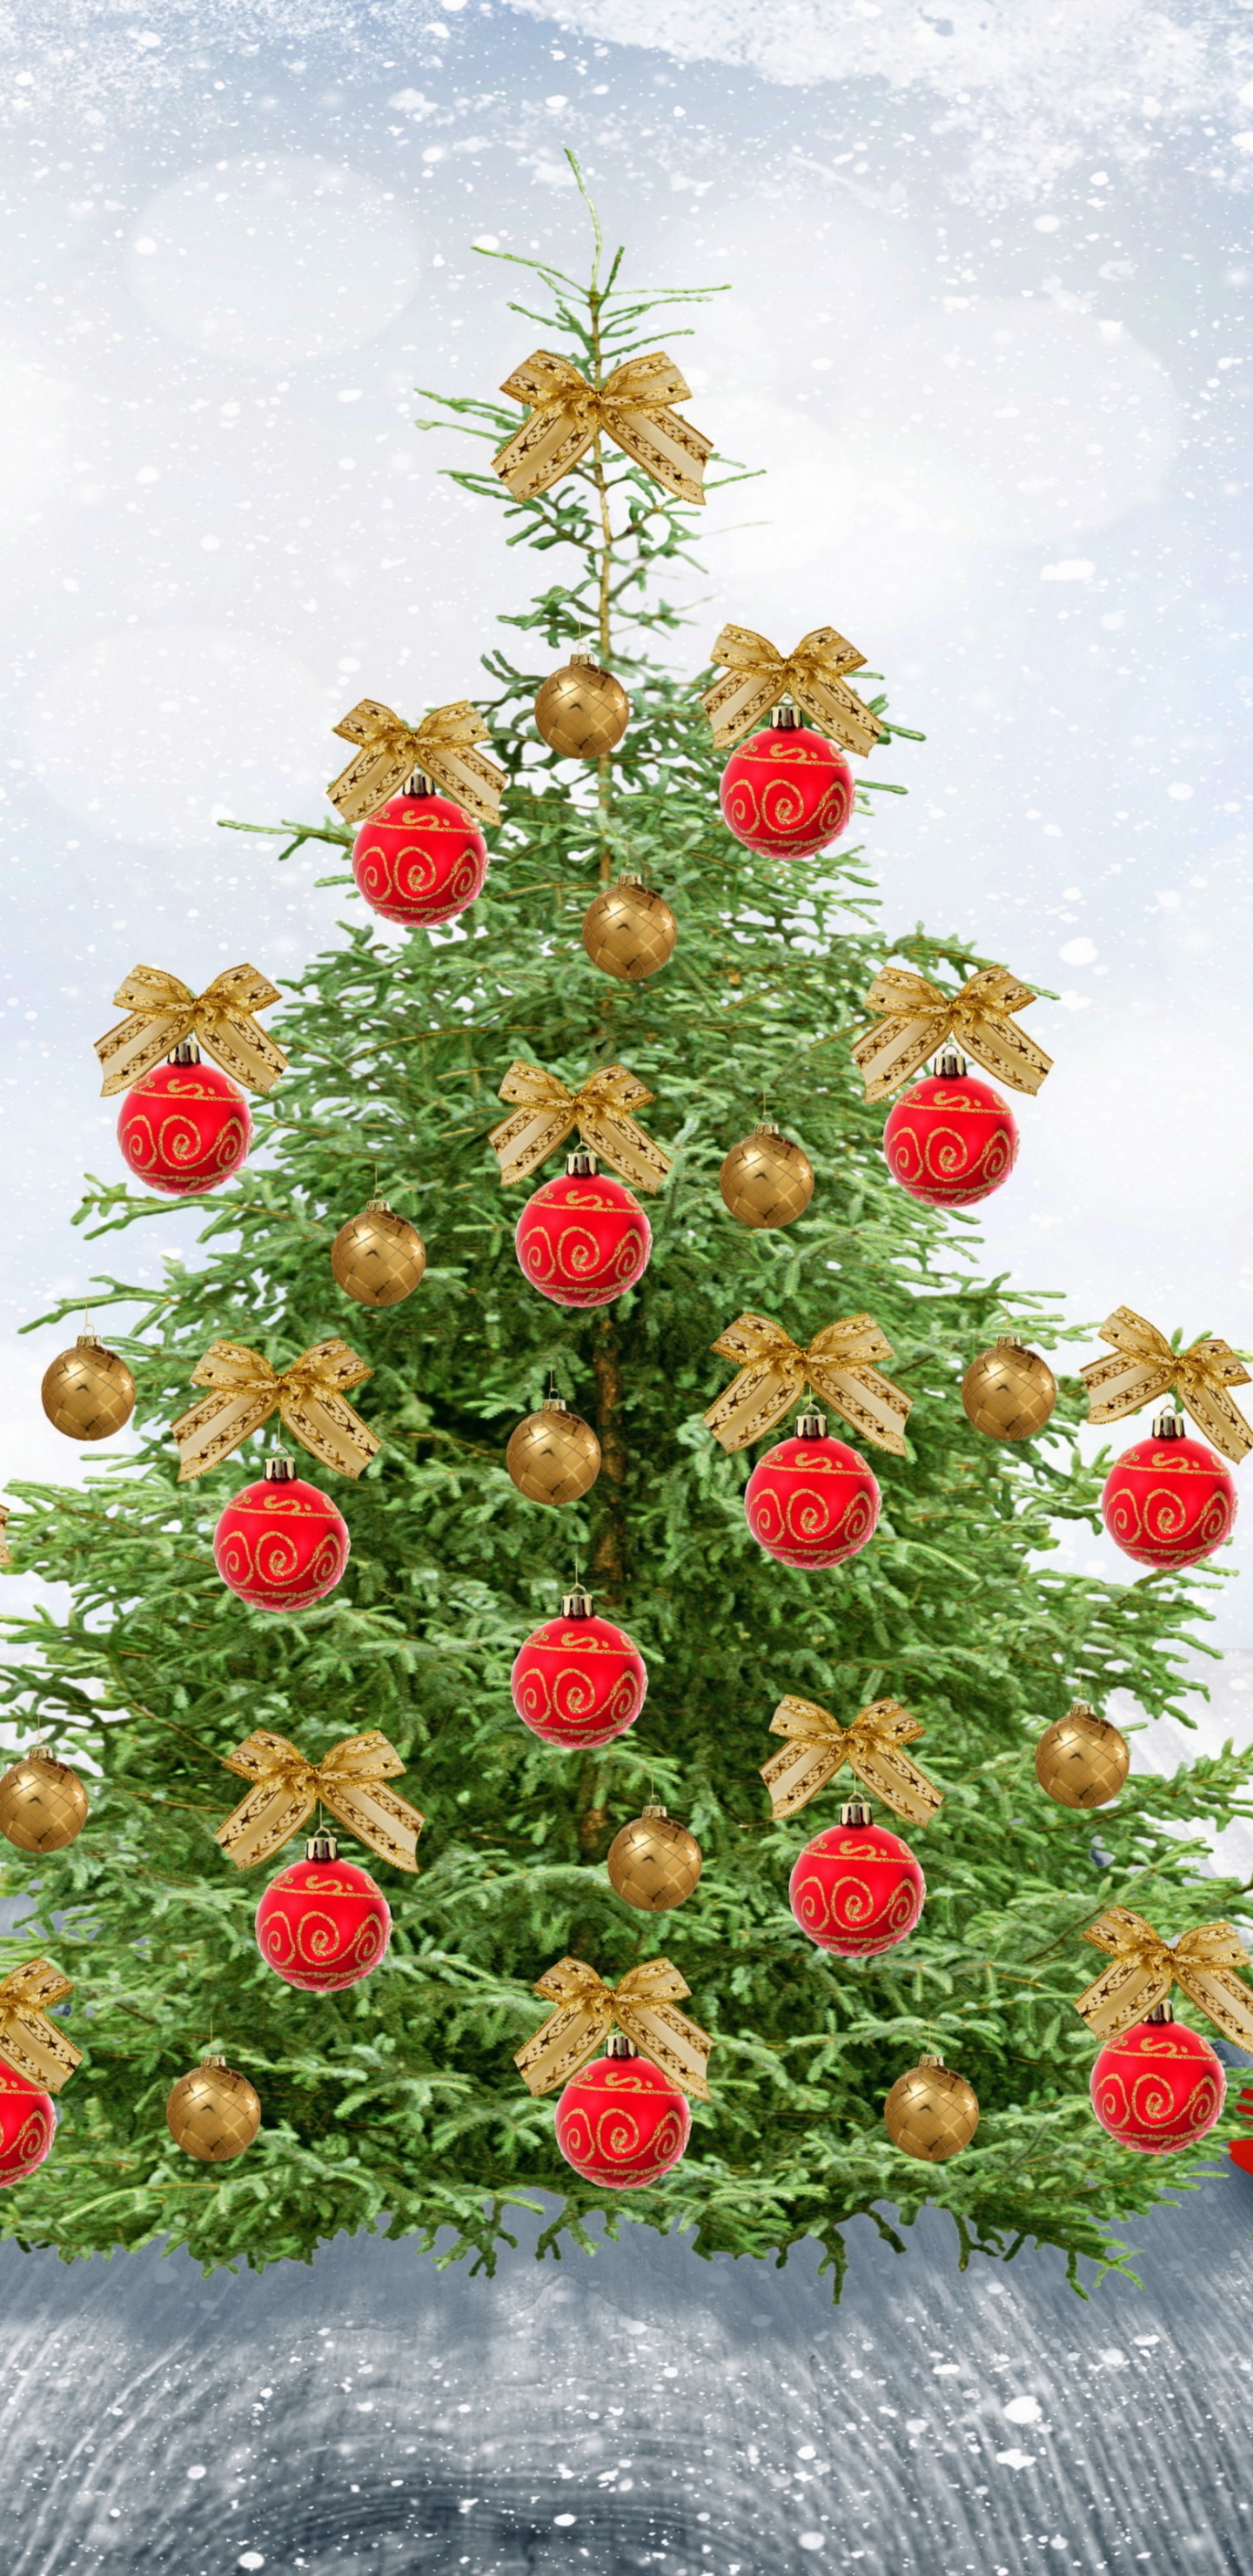 New Year, Christmas Day, Santa Claus, Christmas Tree, Christmas Decoration. Wallpaper in 1440x2960 Resolution